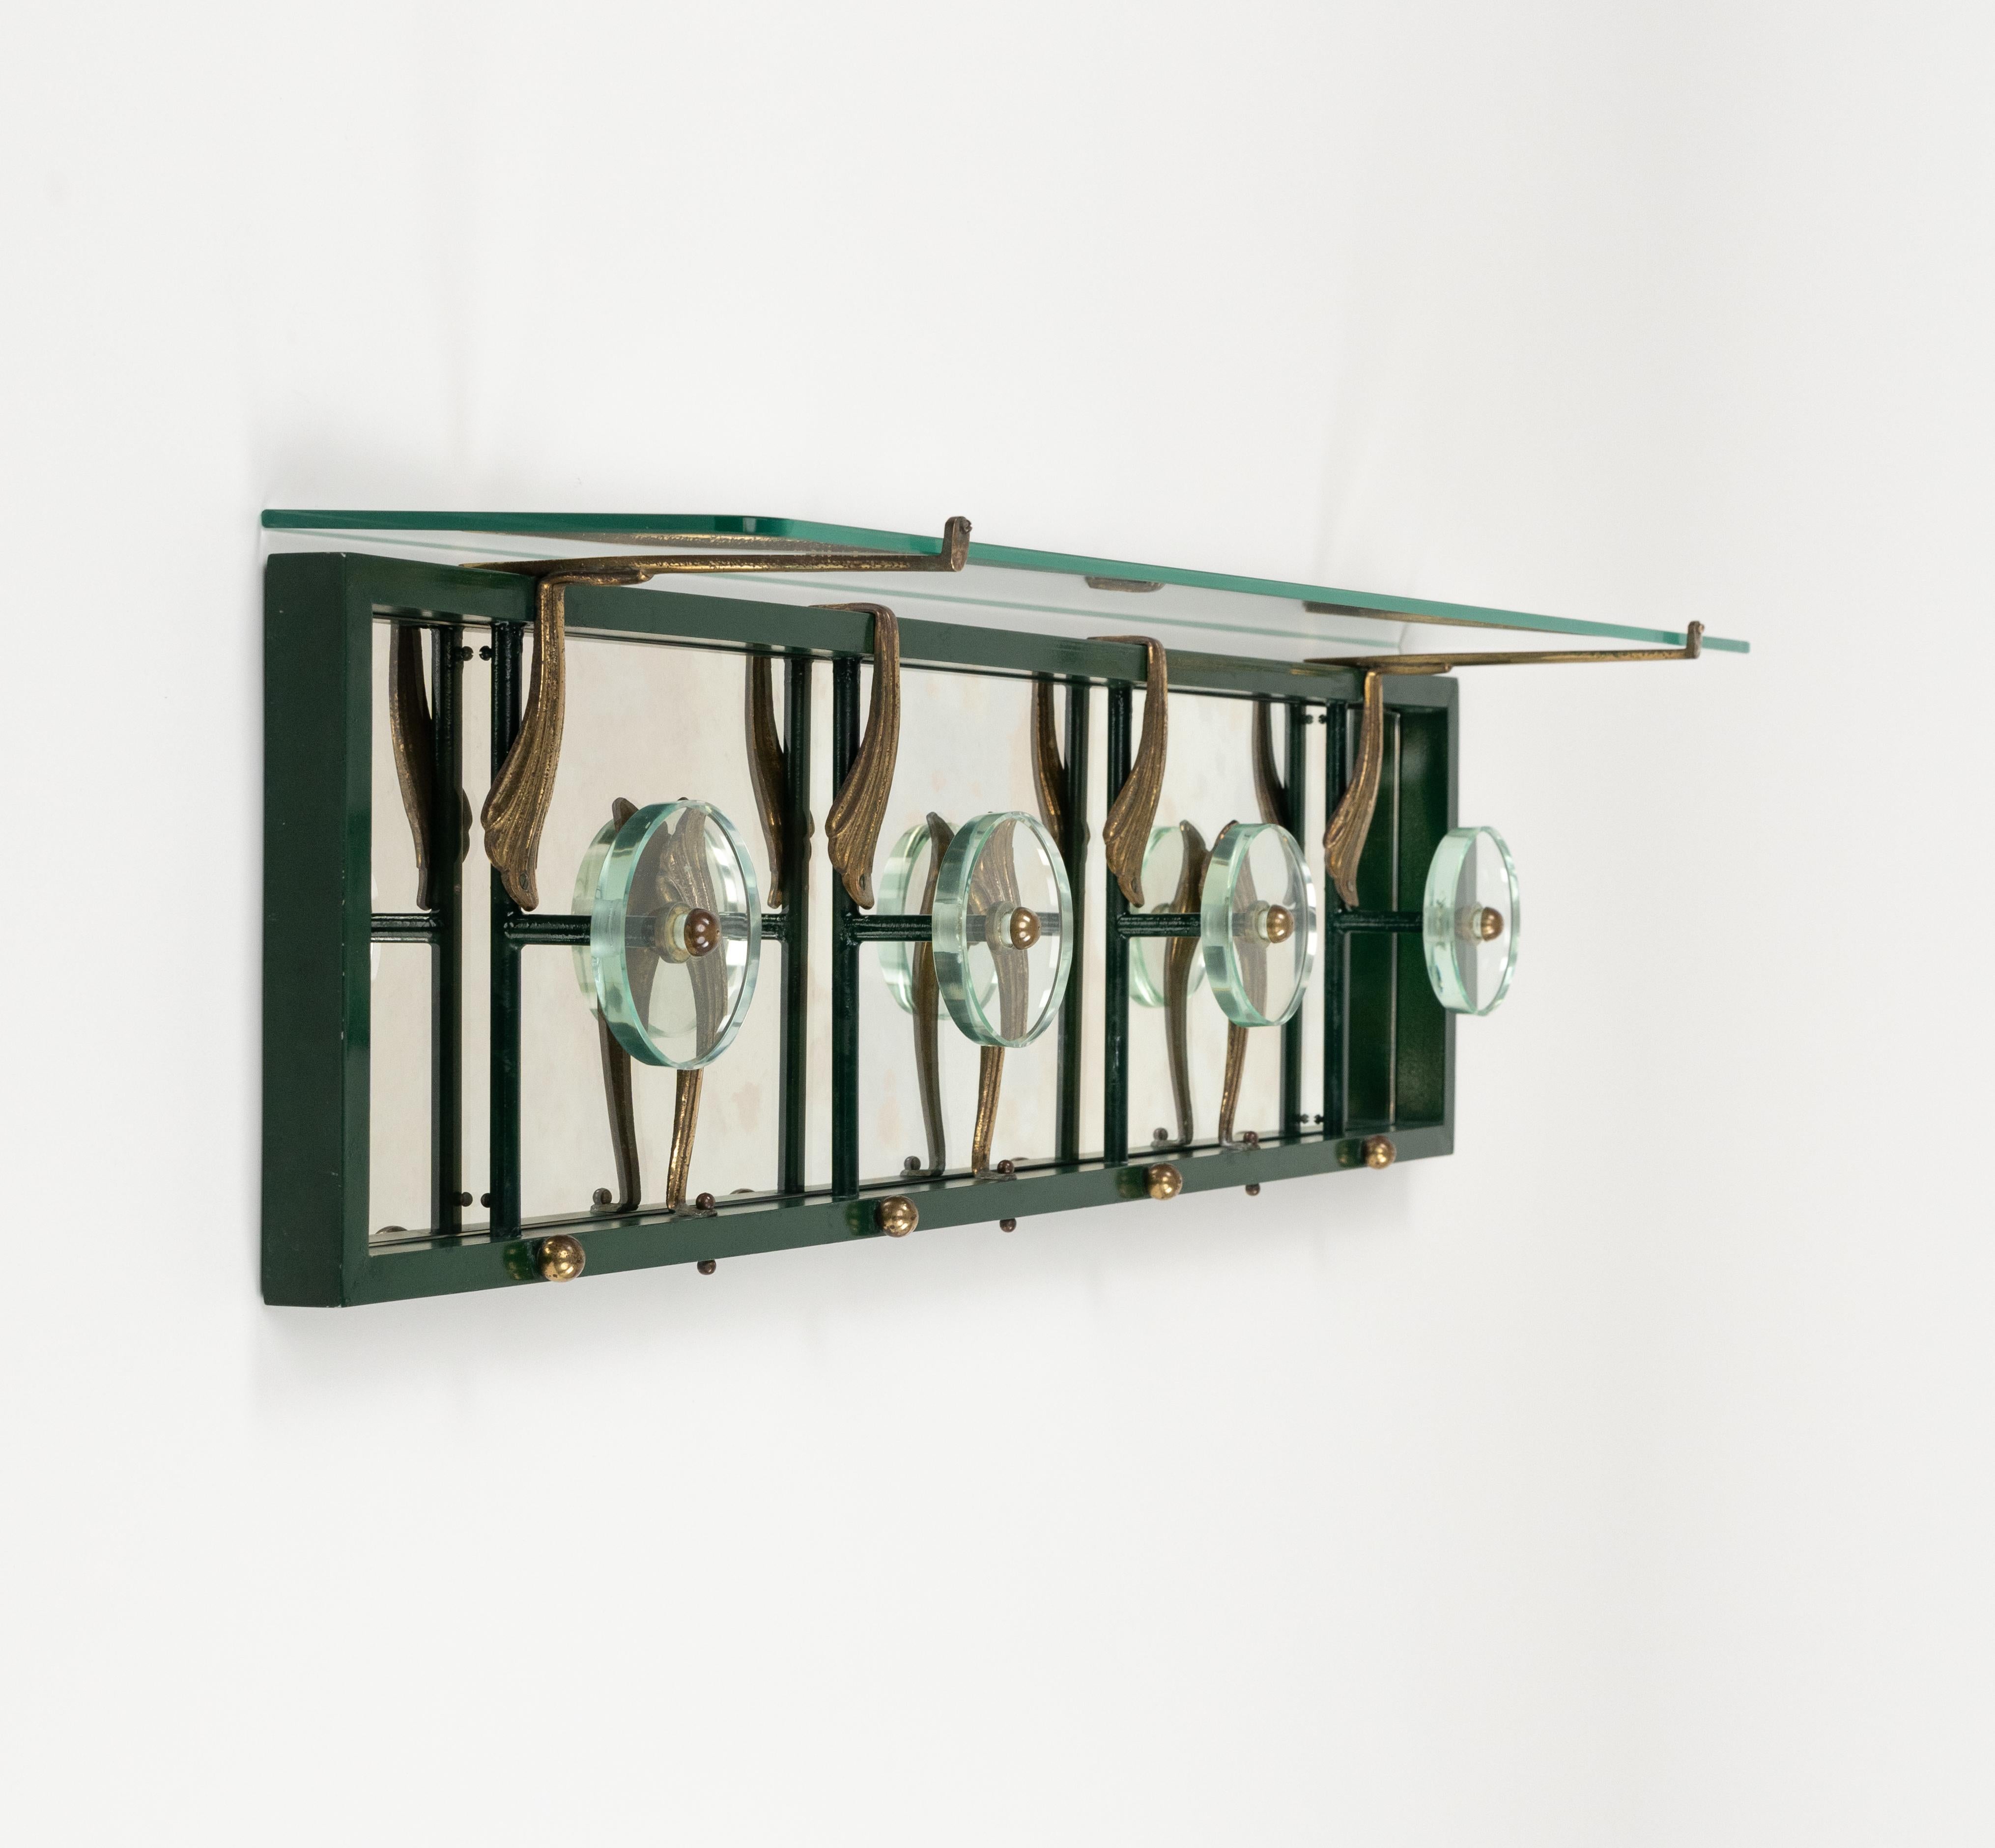 Midcentury amazing rectangular wall-mounted coat rack in aluminum, mirror, brass, a top glass shelf with four circular hooks in glass by Cristal Art.

Made in Italy in the 1950s.